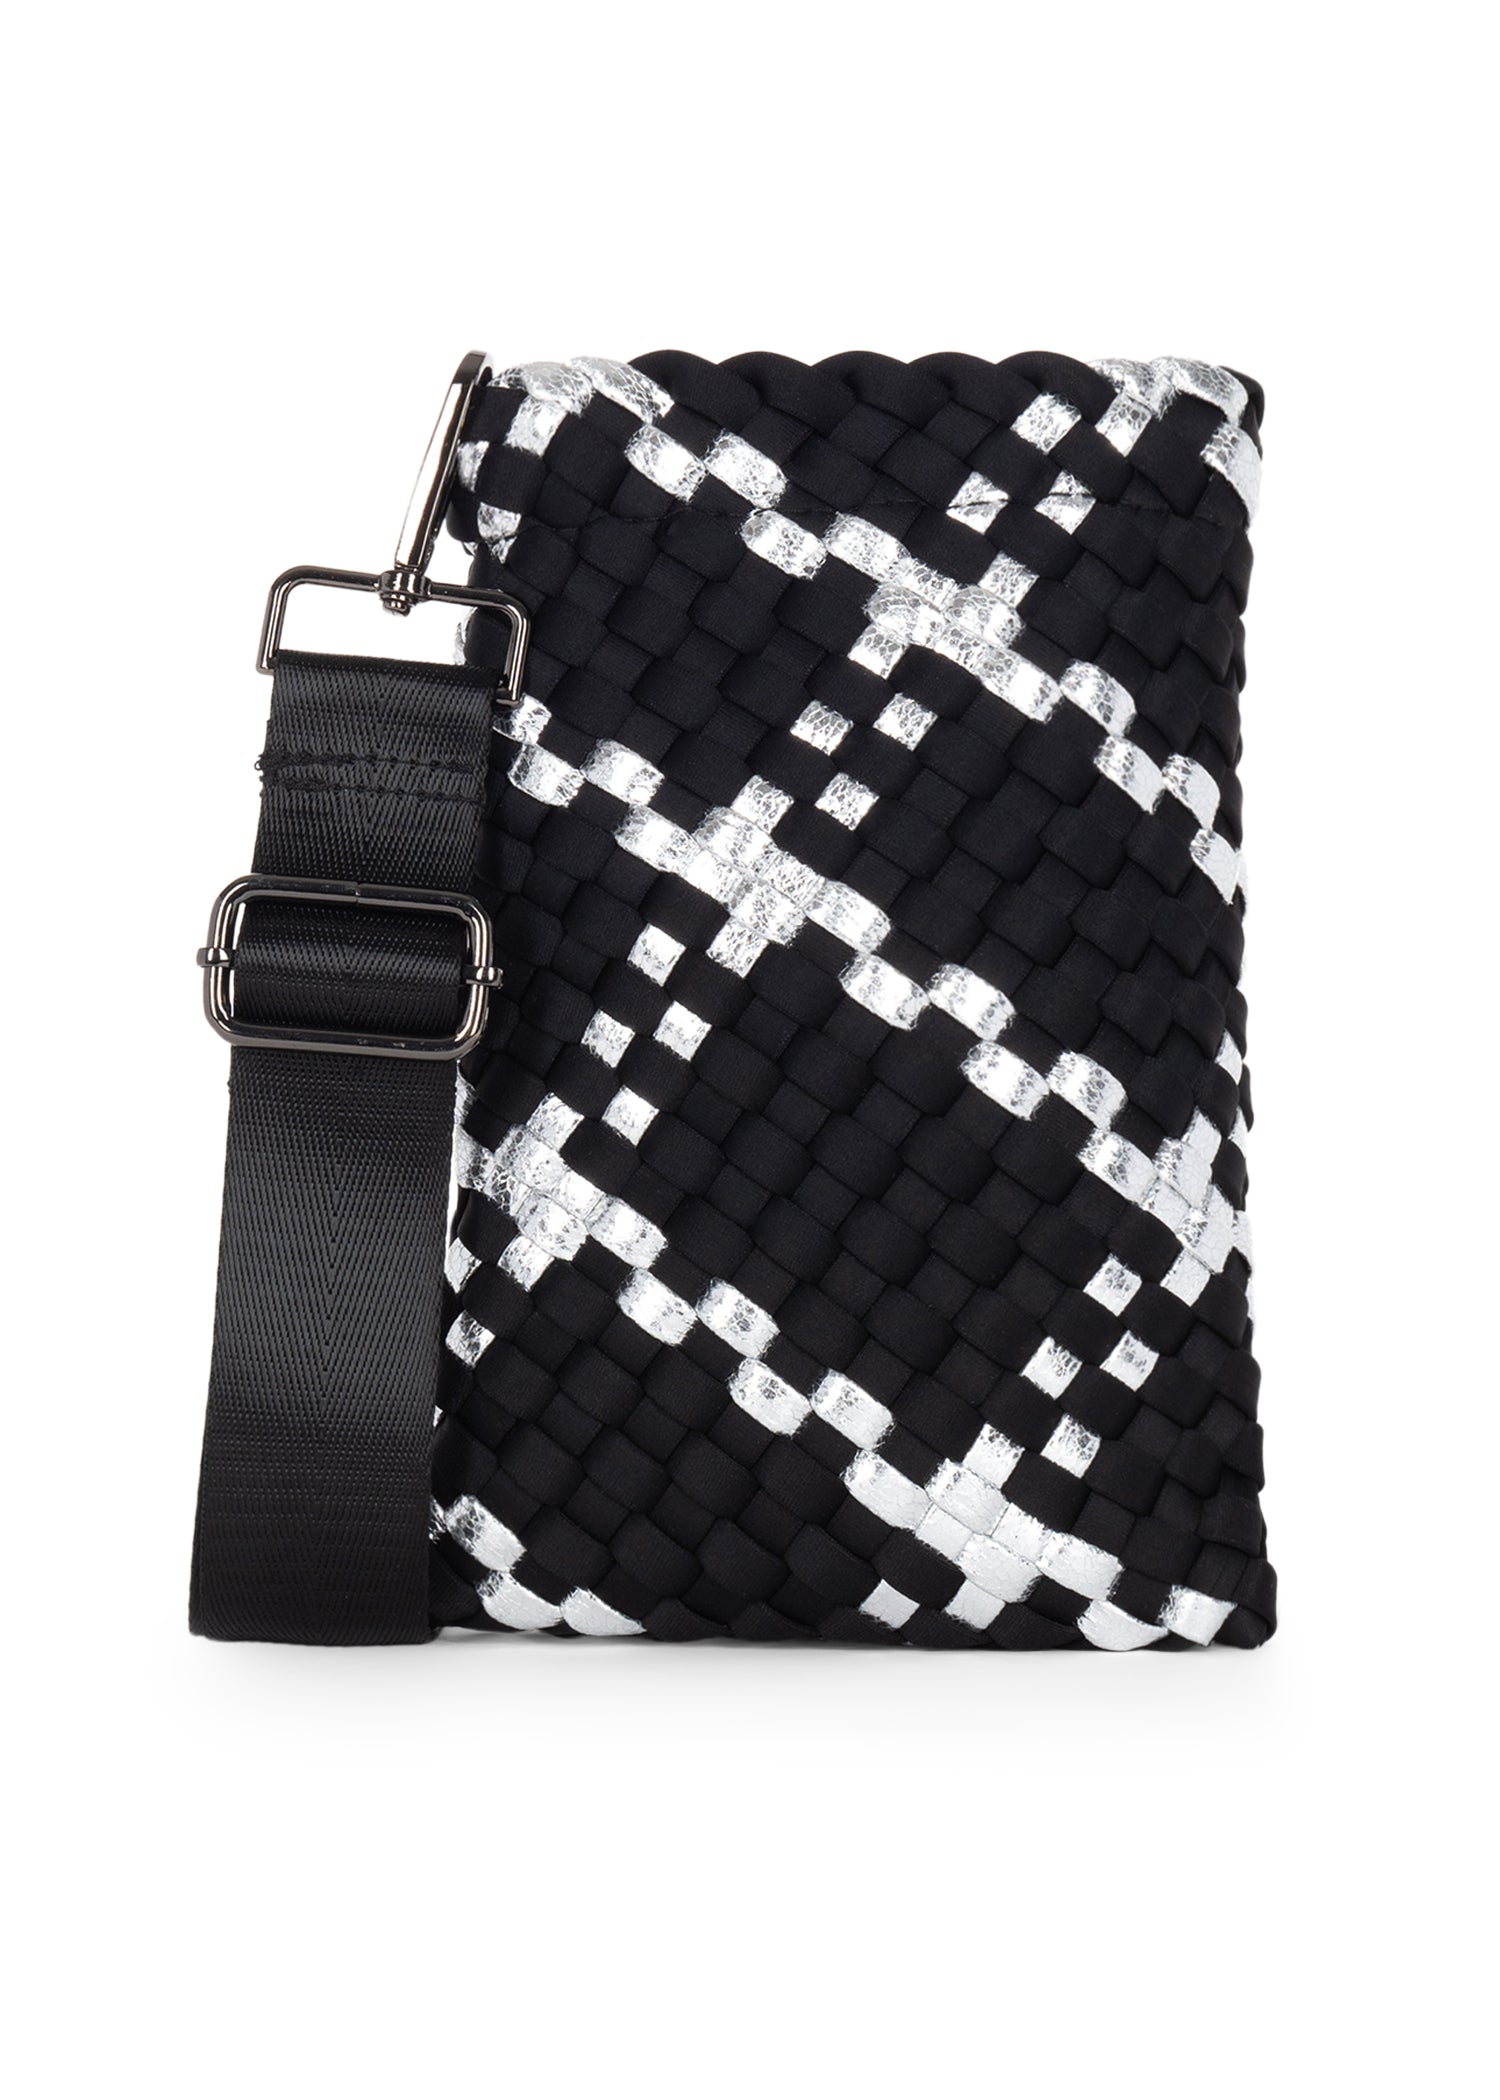 Shay Uptown Woven Phone Bag